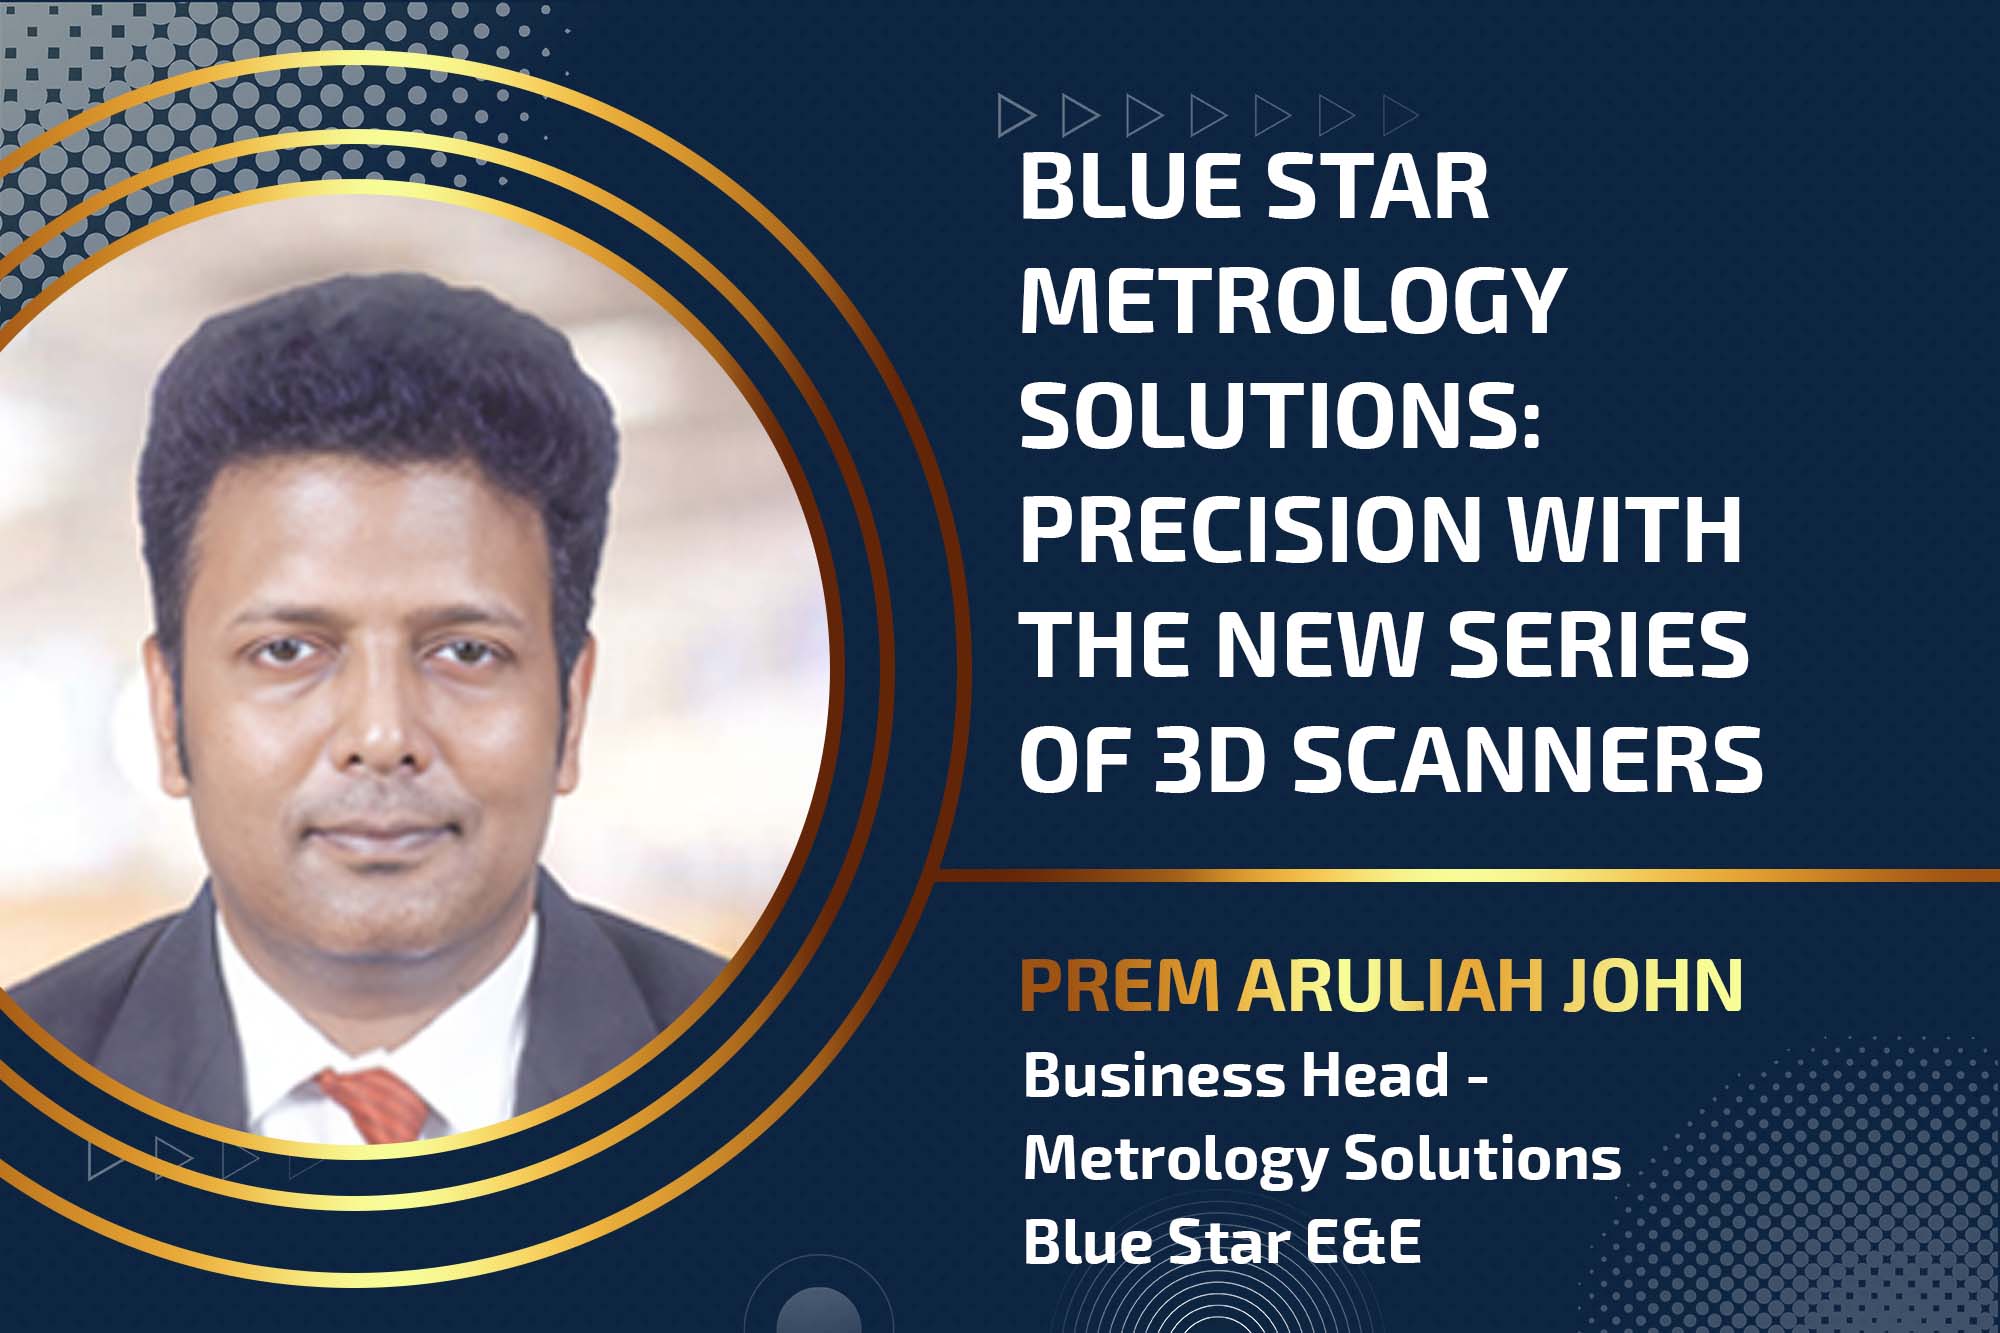 Blue Star Metrology Solutions: Precision with the new series of 3D scanners